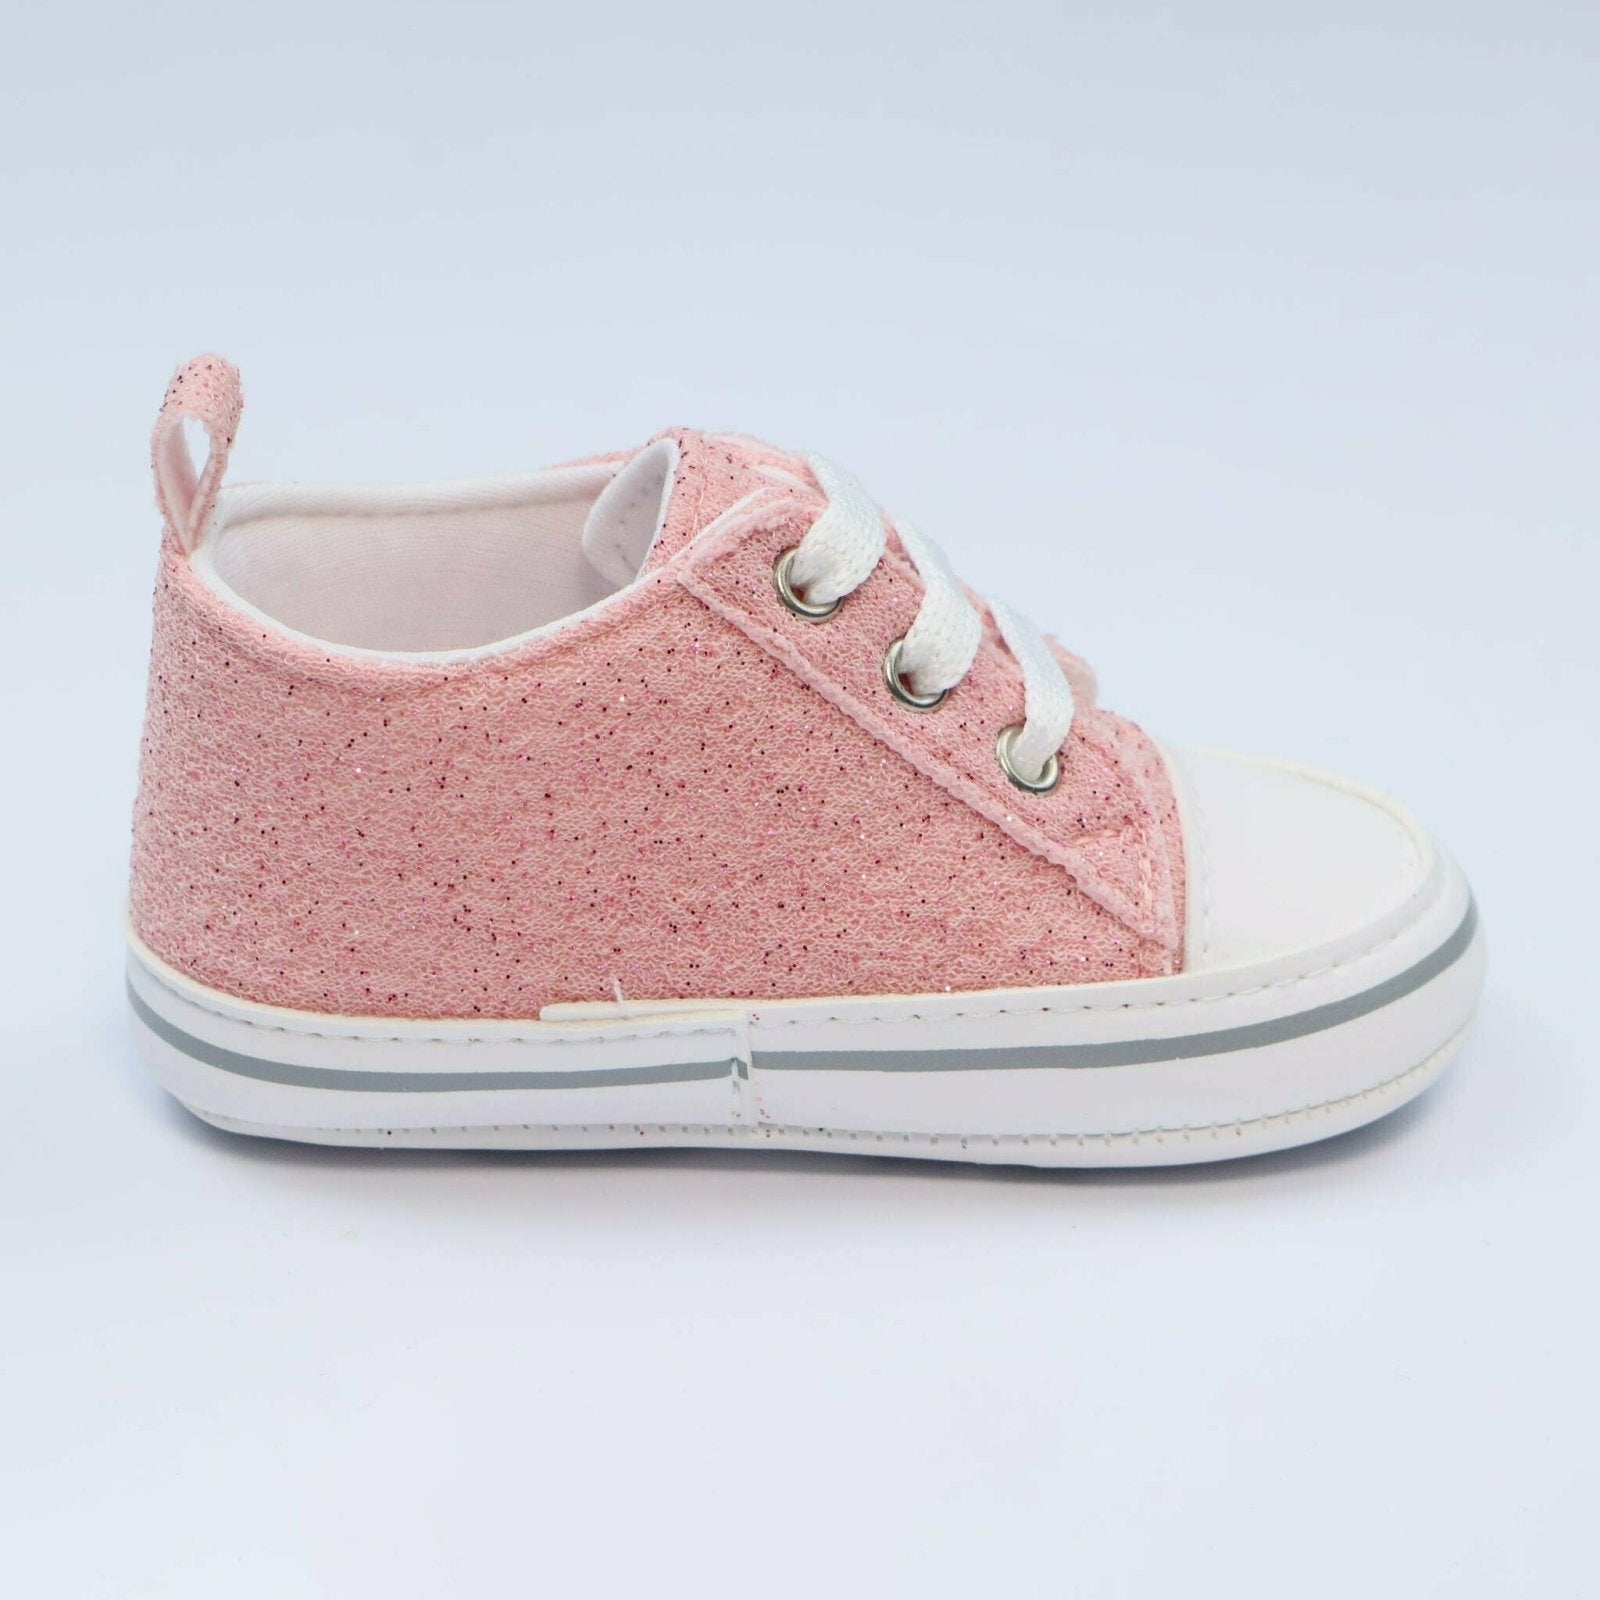 Baby Shoes Pink With Texture by Baby Pattini